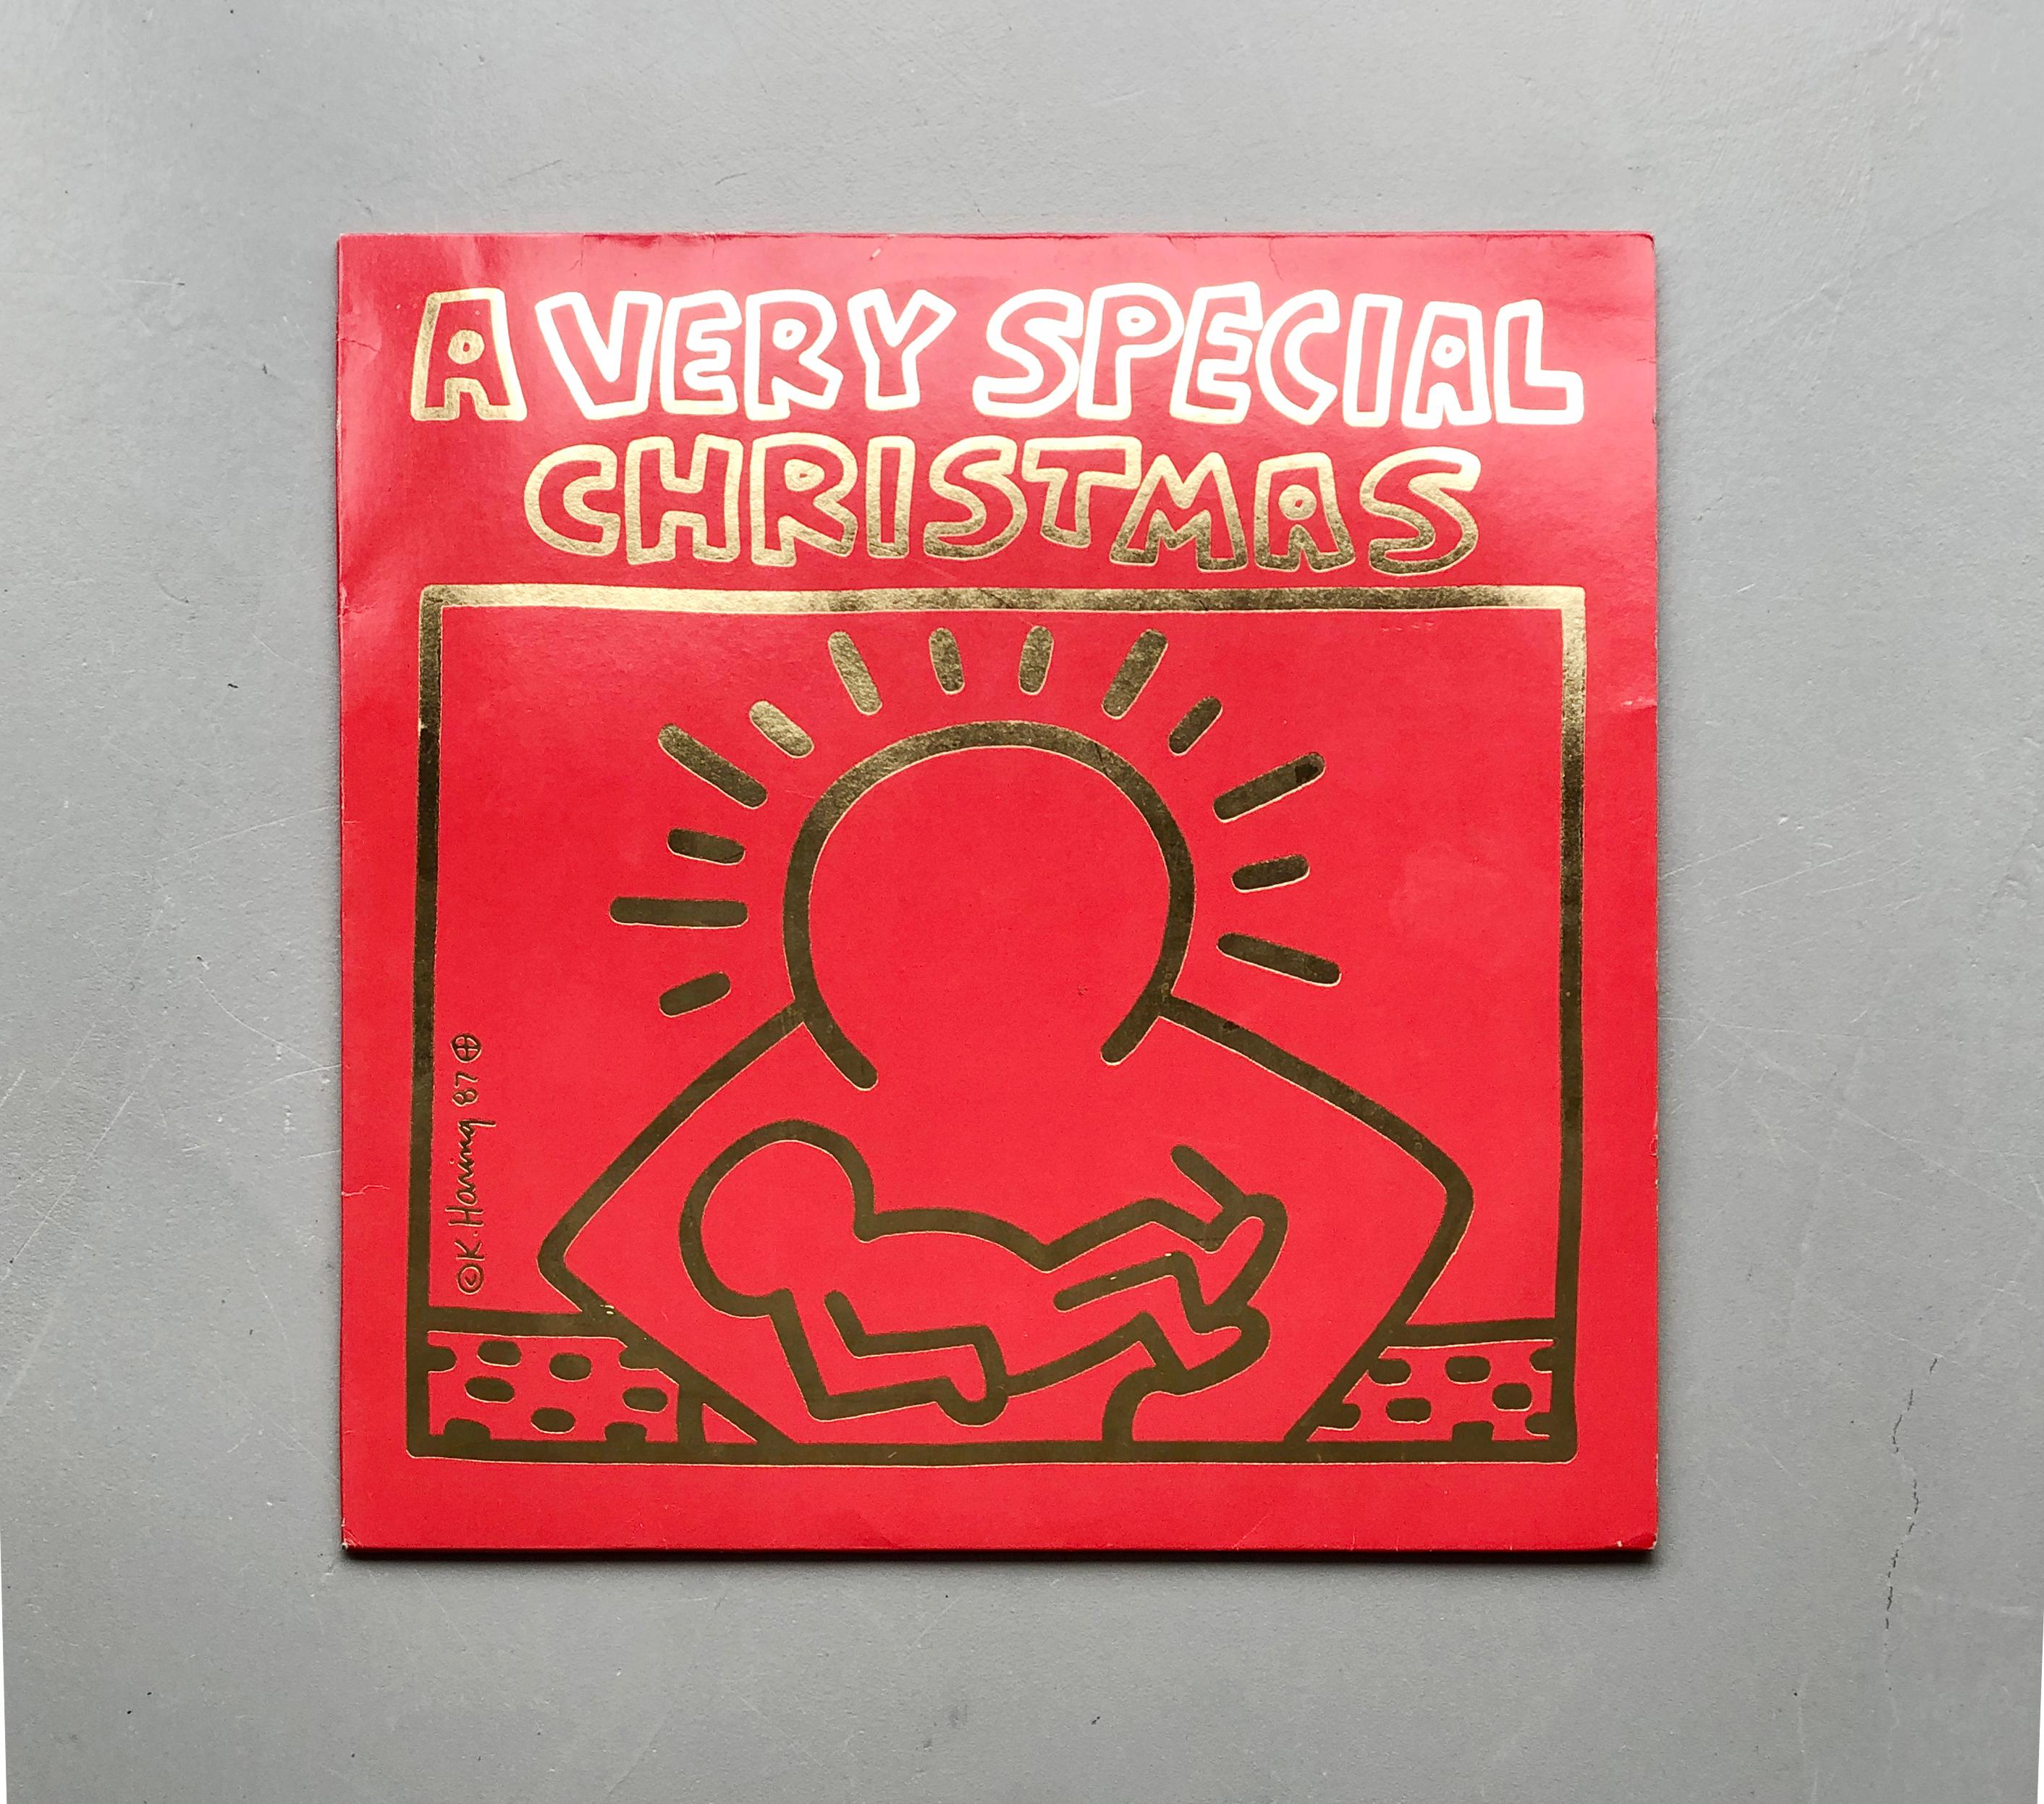 A Very Special Christmas 
Various artists
1987 first pressing vinyl record
A&M Records - SP-3911
Cover art by Keith Haring

This 1987 original pressing vinyl record showcases the distinctive artwork of Keith Haring and serves as the inaugural